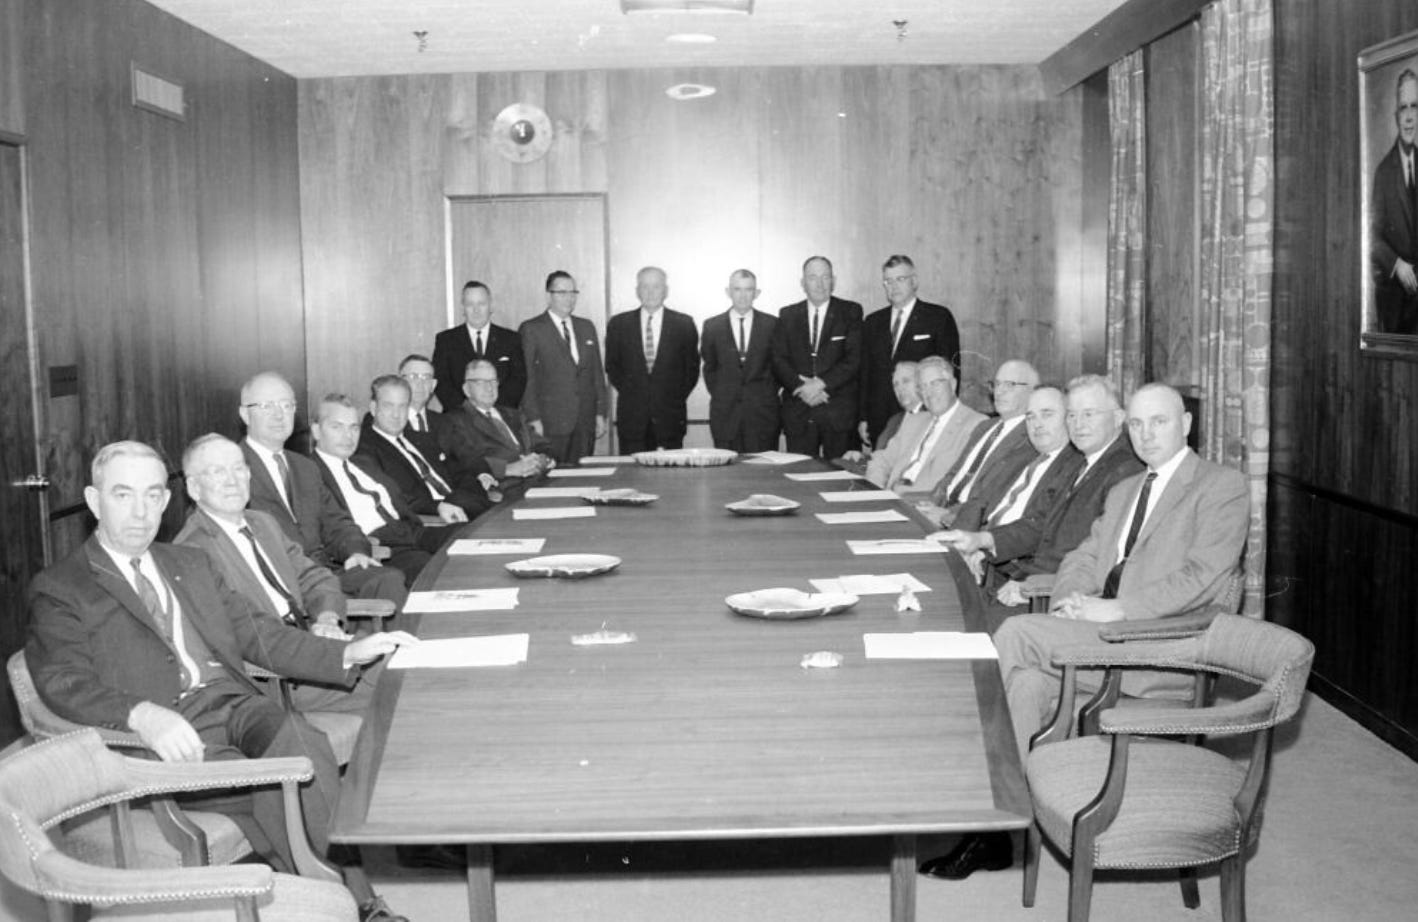 Another picture of men in suits, this one they're all fanned out around a very large table in a wood paneled room